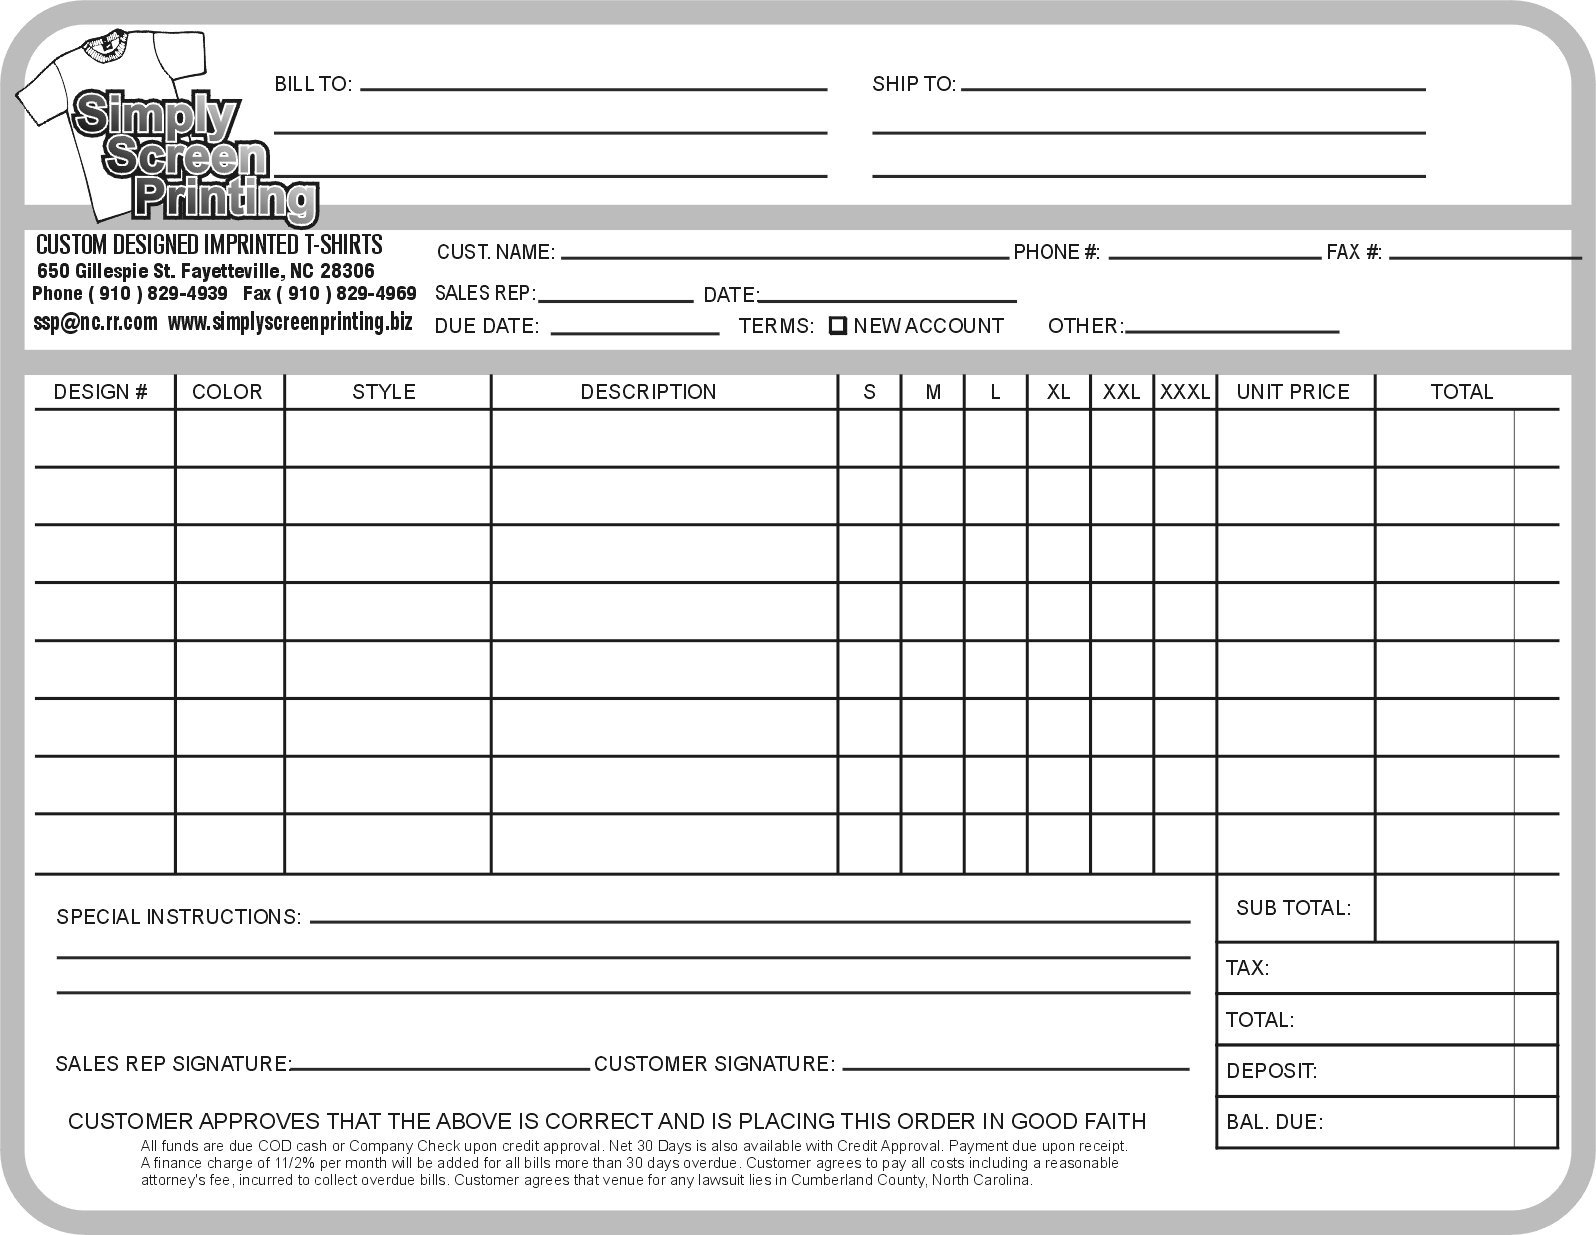 free printable business invoices blank invoice printable free resume guide 1596 X 1235